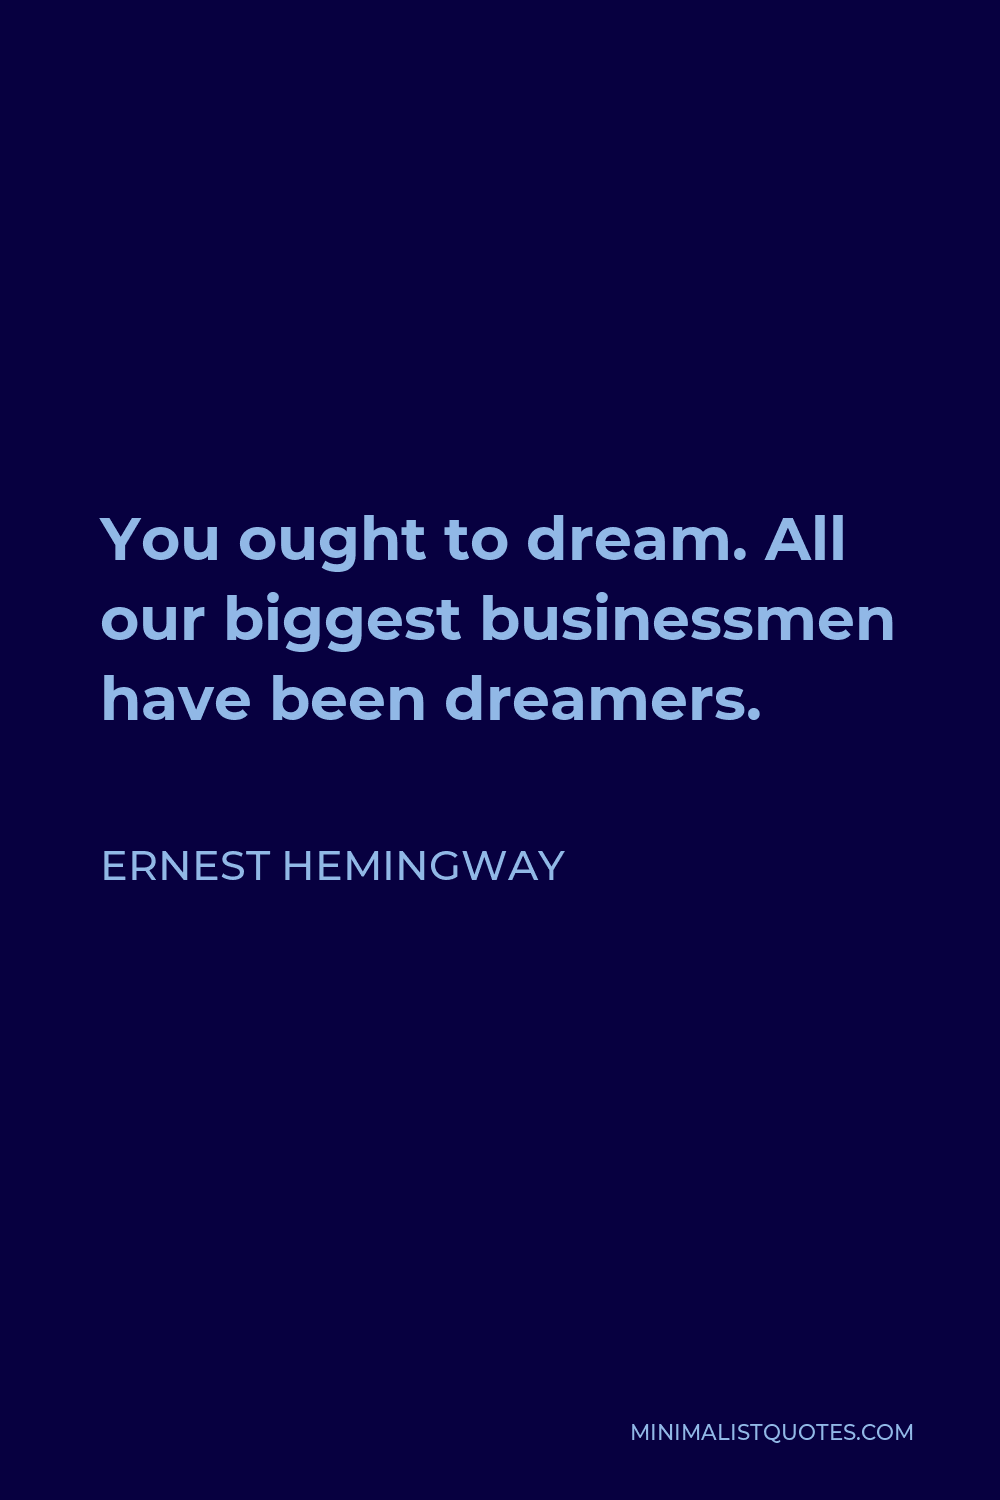 Ernest Hemingway Quote - You ought to dream. All our biggest businessmen have been dreamers.